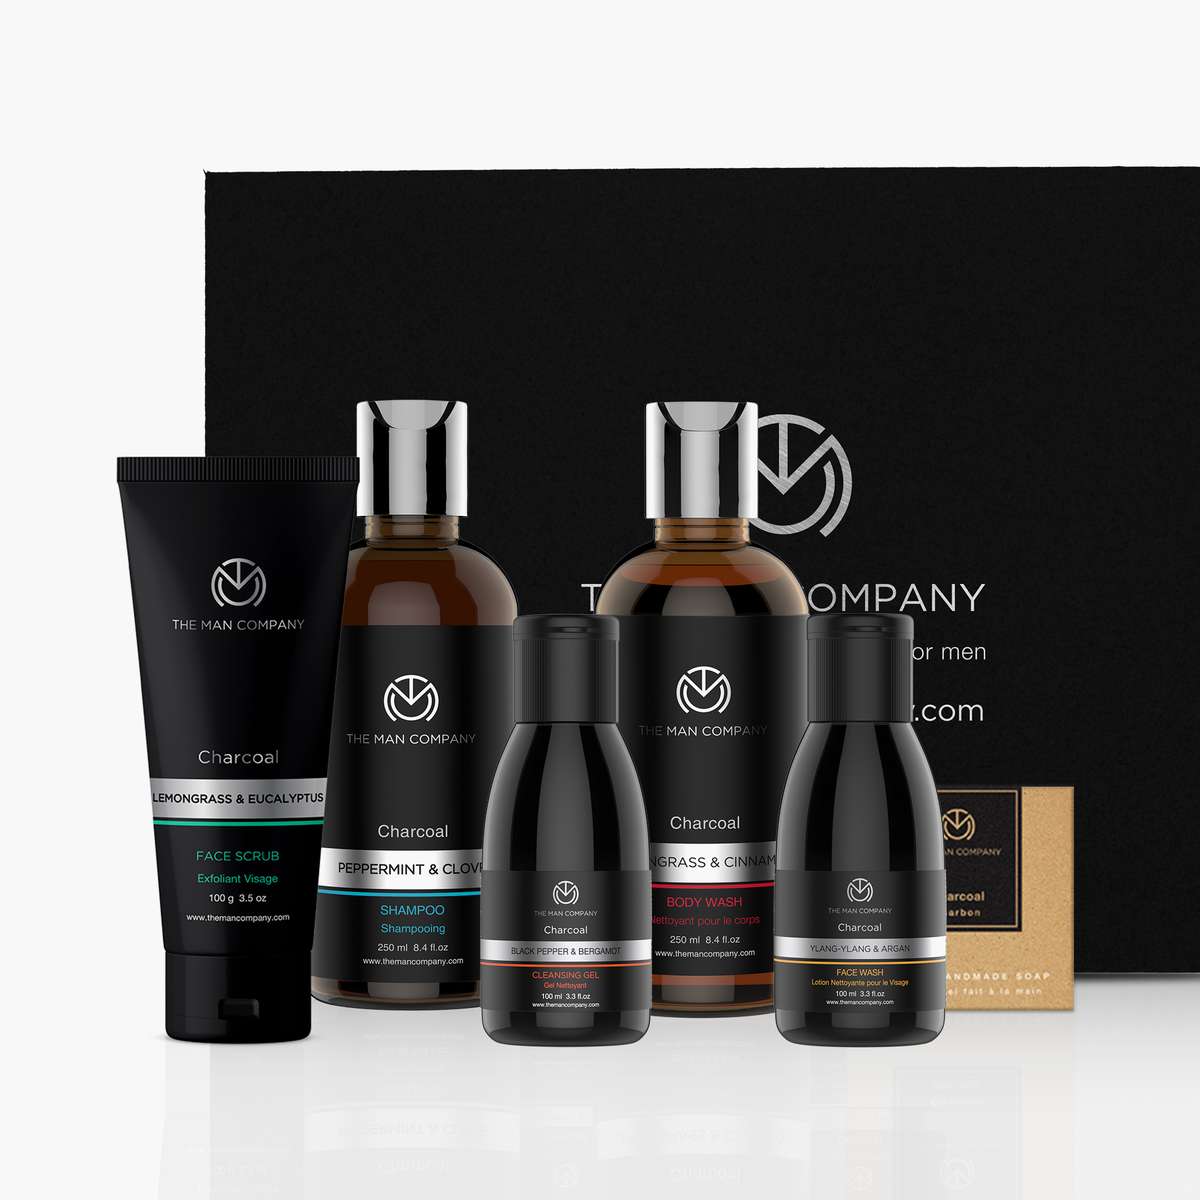 1.THE MAN COMPANY Charcoal Collection